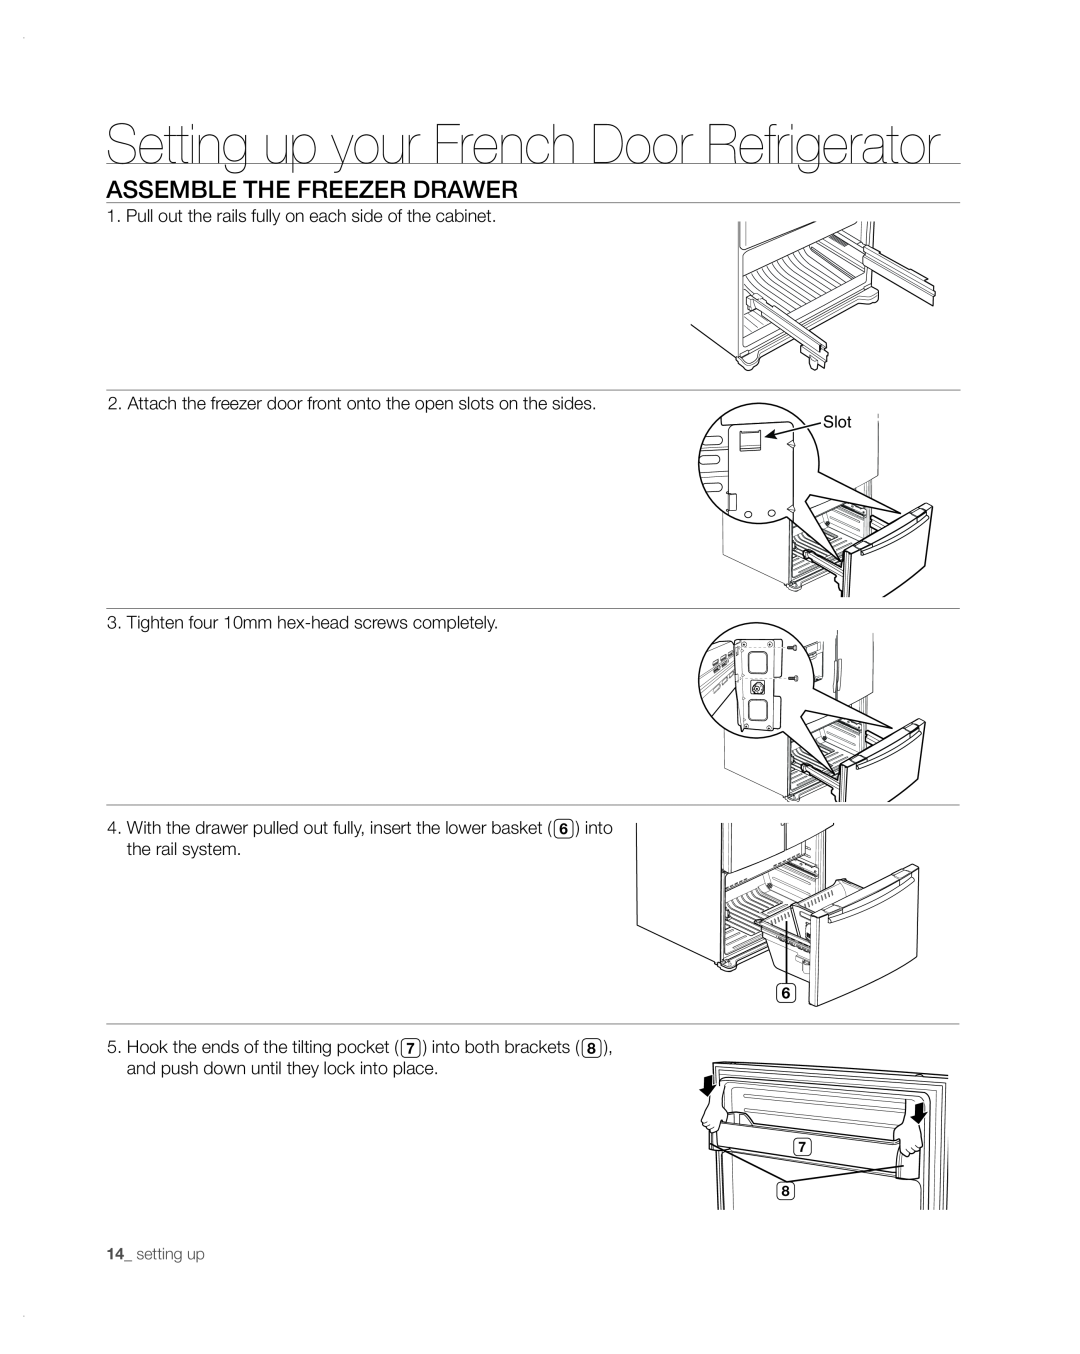 Samsung RFG297AA user manual assemble the freezer drawer, Setting up your French Door Refrigerator 